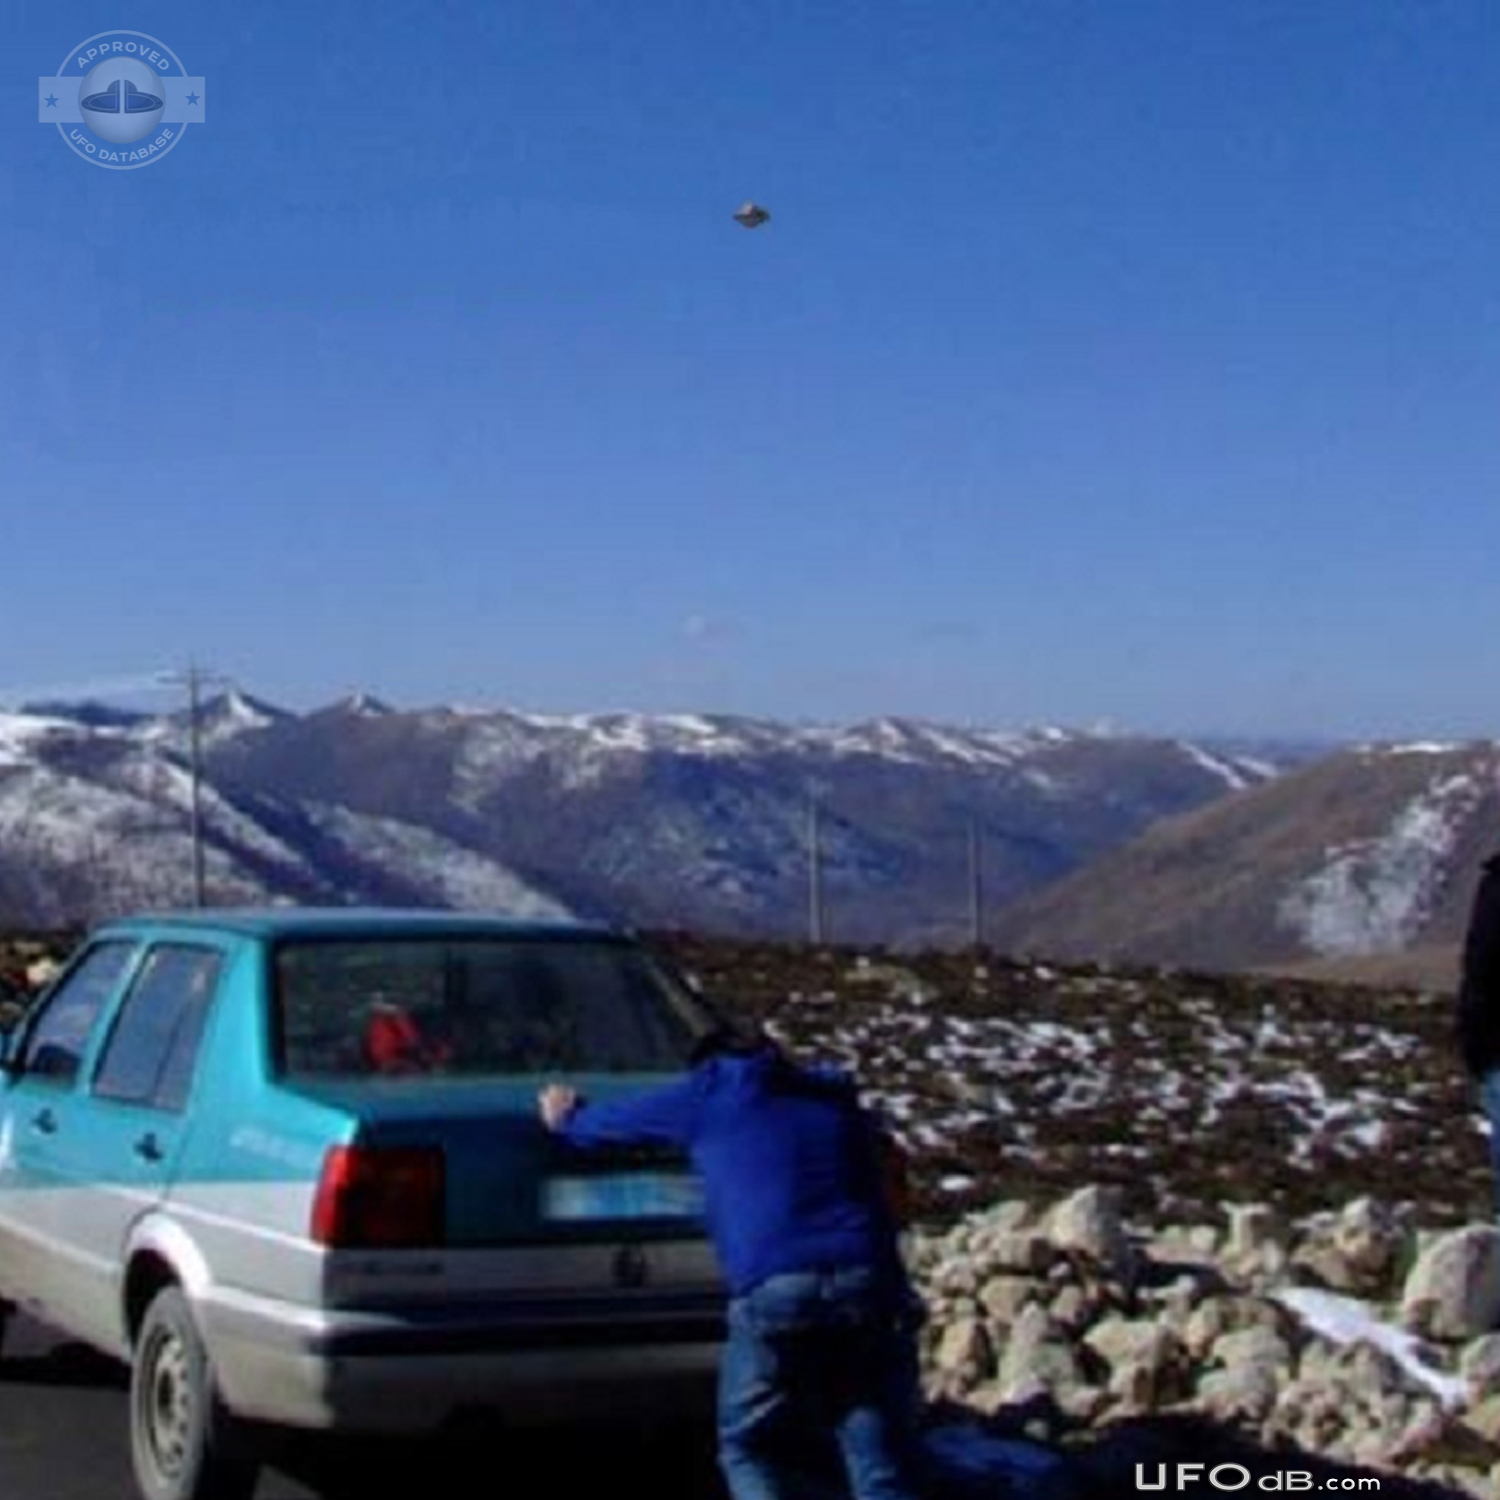 A UFO is photograph in the Icy mountains of Tibet, China February 2011 UFO Picture #251-2